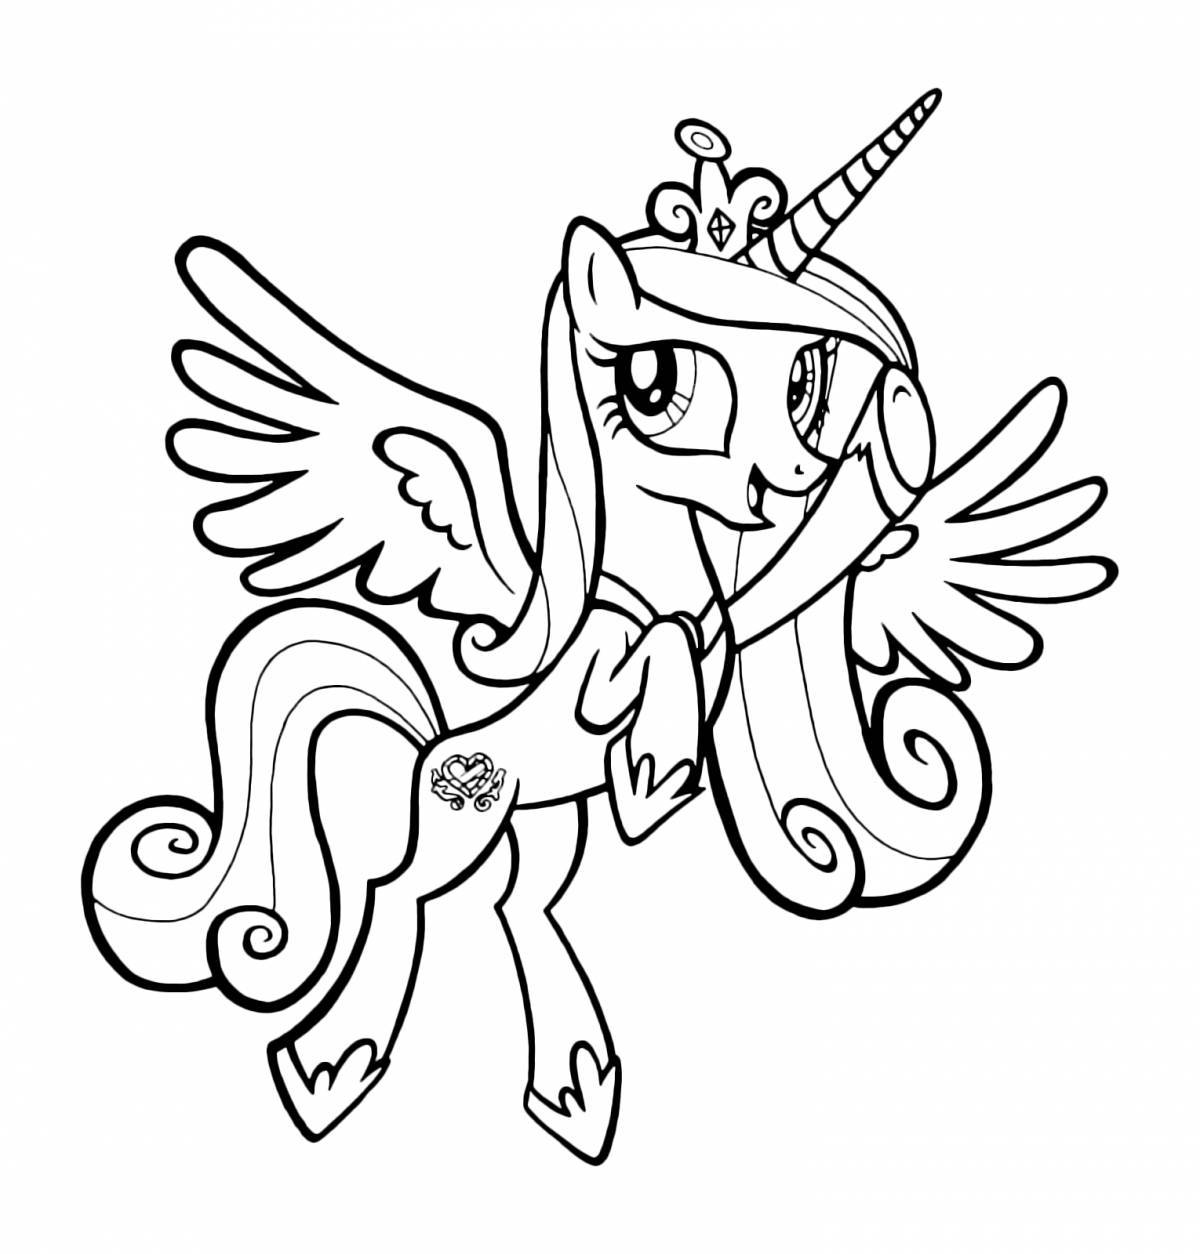 My little pony glowing coloring page